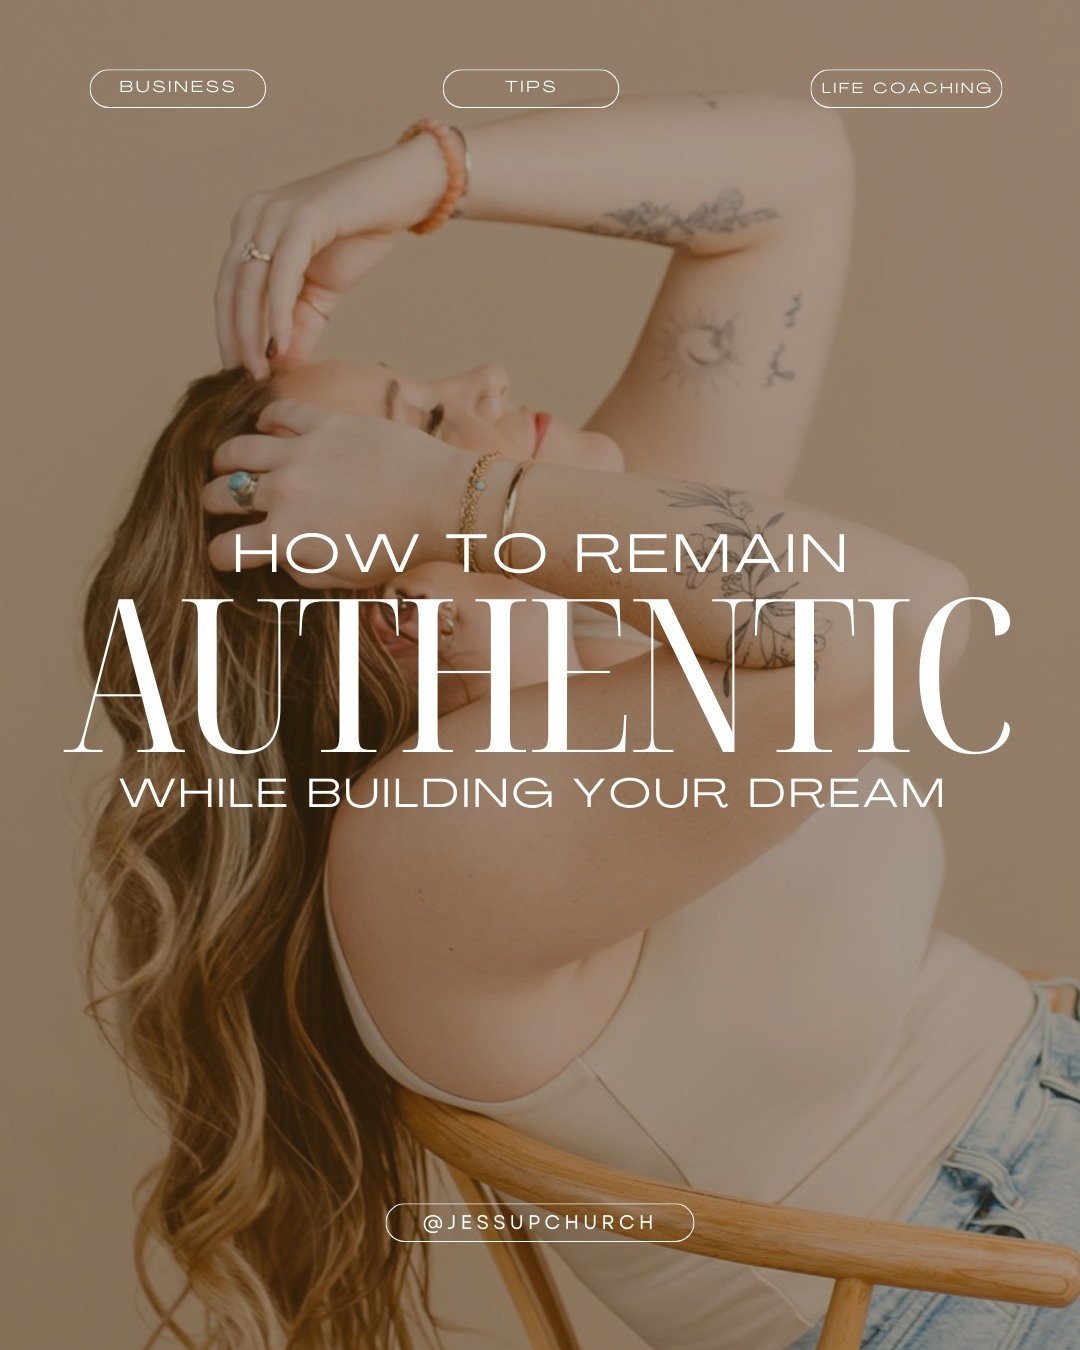 as business owners in an online world, we've heard time and time again, build trust, build credibility...⁠
⁠
and one of the most valuable ways to do that is to be authentic...be YOU.⁠
⁠
a lot of times, we feel like we have to become a completely diff